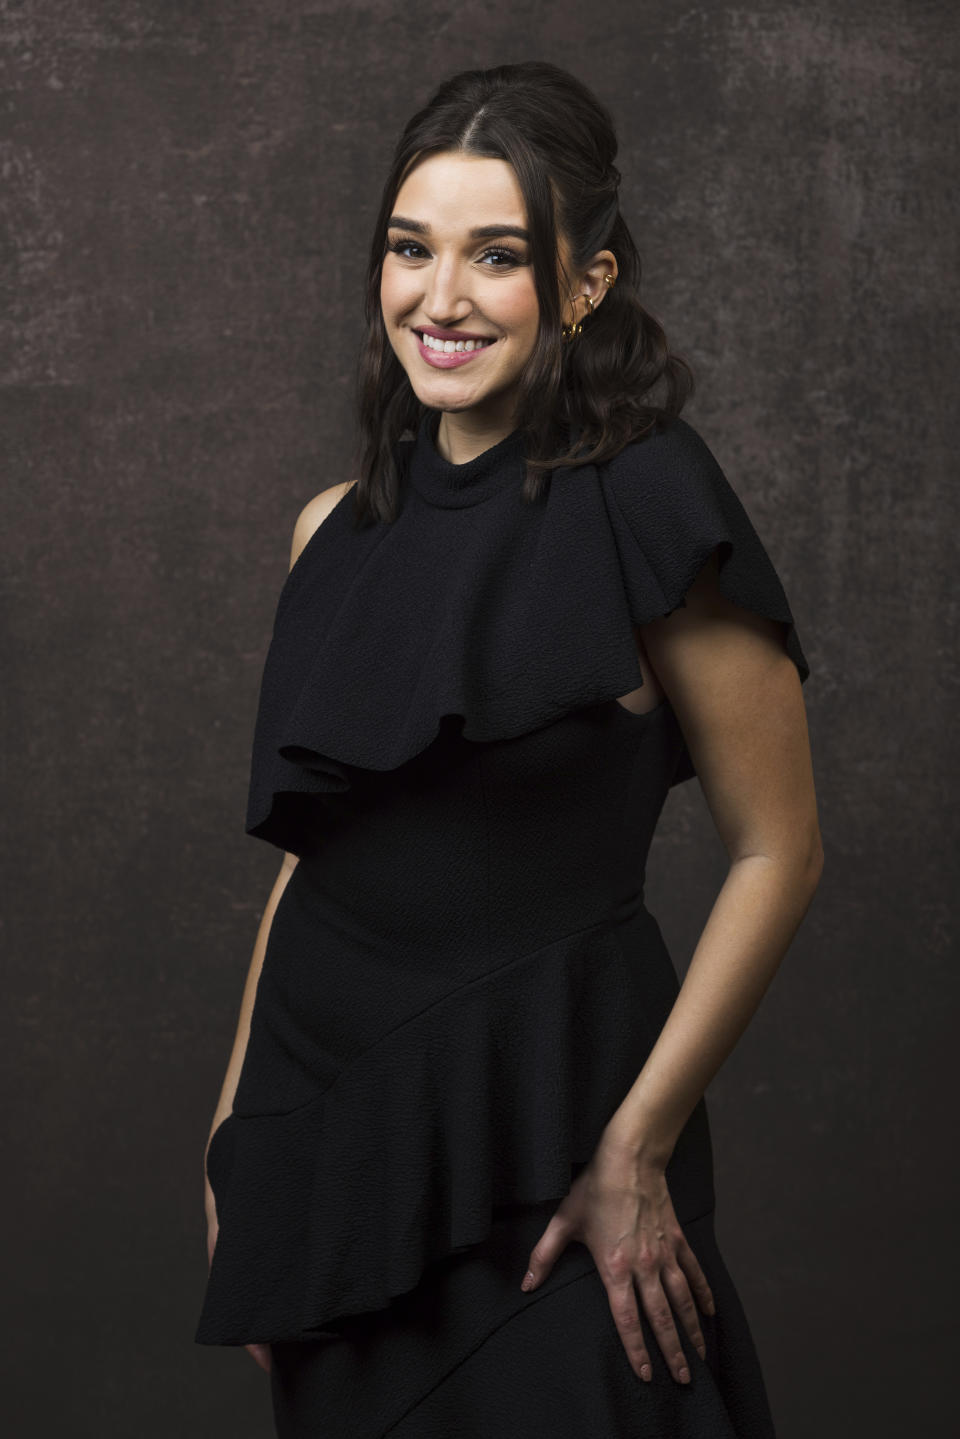 FILE - Marisa Davila, a cast member in the Paramount+ television series "Grease: Rise of the Pink Ladies," poses for a portrait during the Winter Television Critics Association Press Tour on Jan. 9, 2023, in Pasadena, Calif. (Willy Sanjuan/Invision/AP, File)